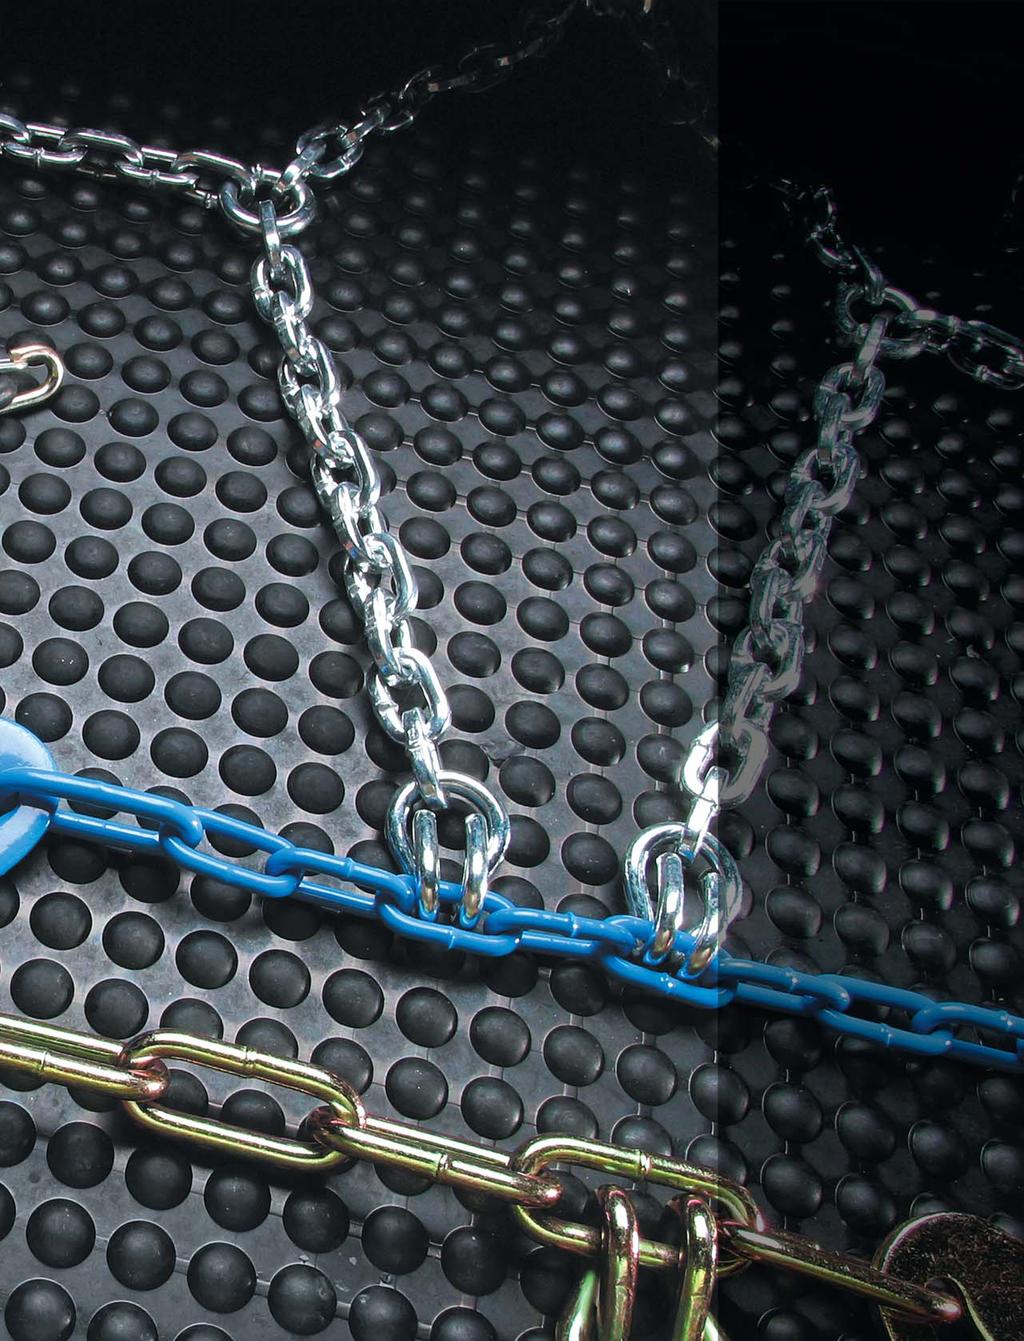 Section 5 Link Chain Traction Products DIAMONDSTYLE PRODUCTS... 67 & 4 Whitestar & Whitestar LT... 67 Diamond Blue... 4 HPATTERN PRODUCTS... 35 Twin Grip Tractor Chain... 35 LADDERSTYLE PRODUCTS.